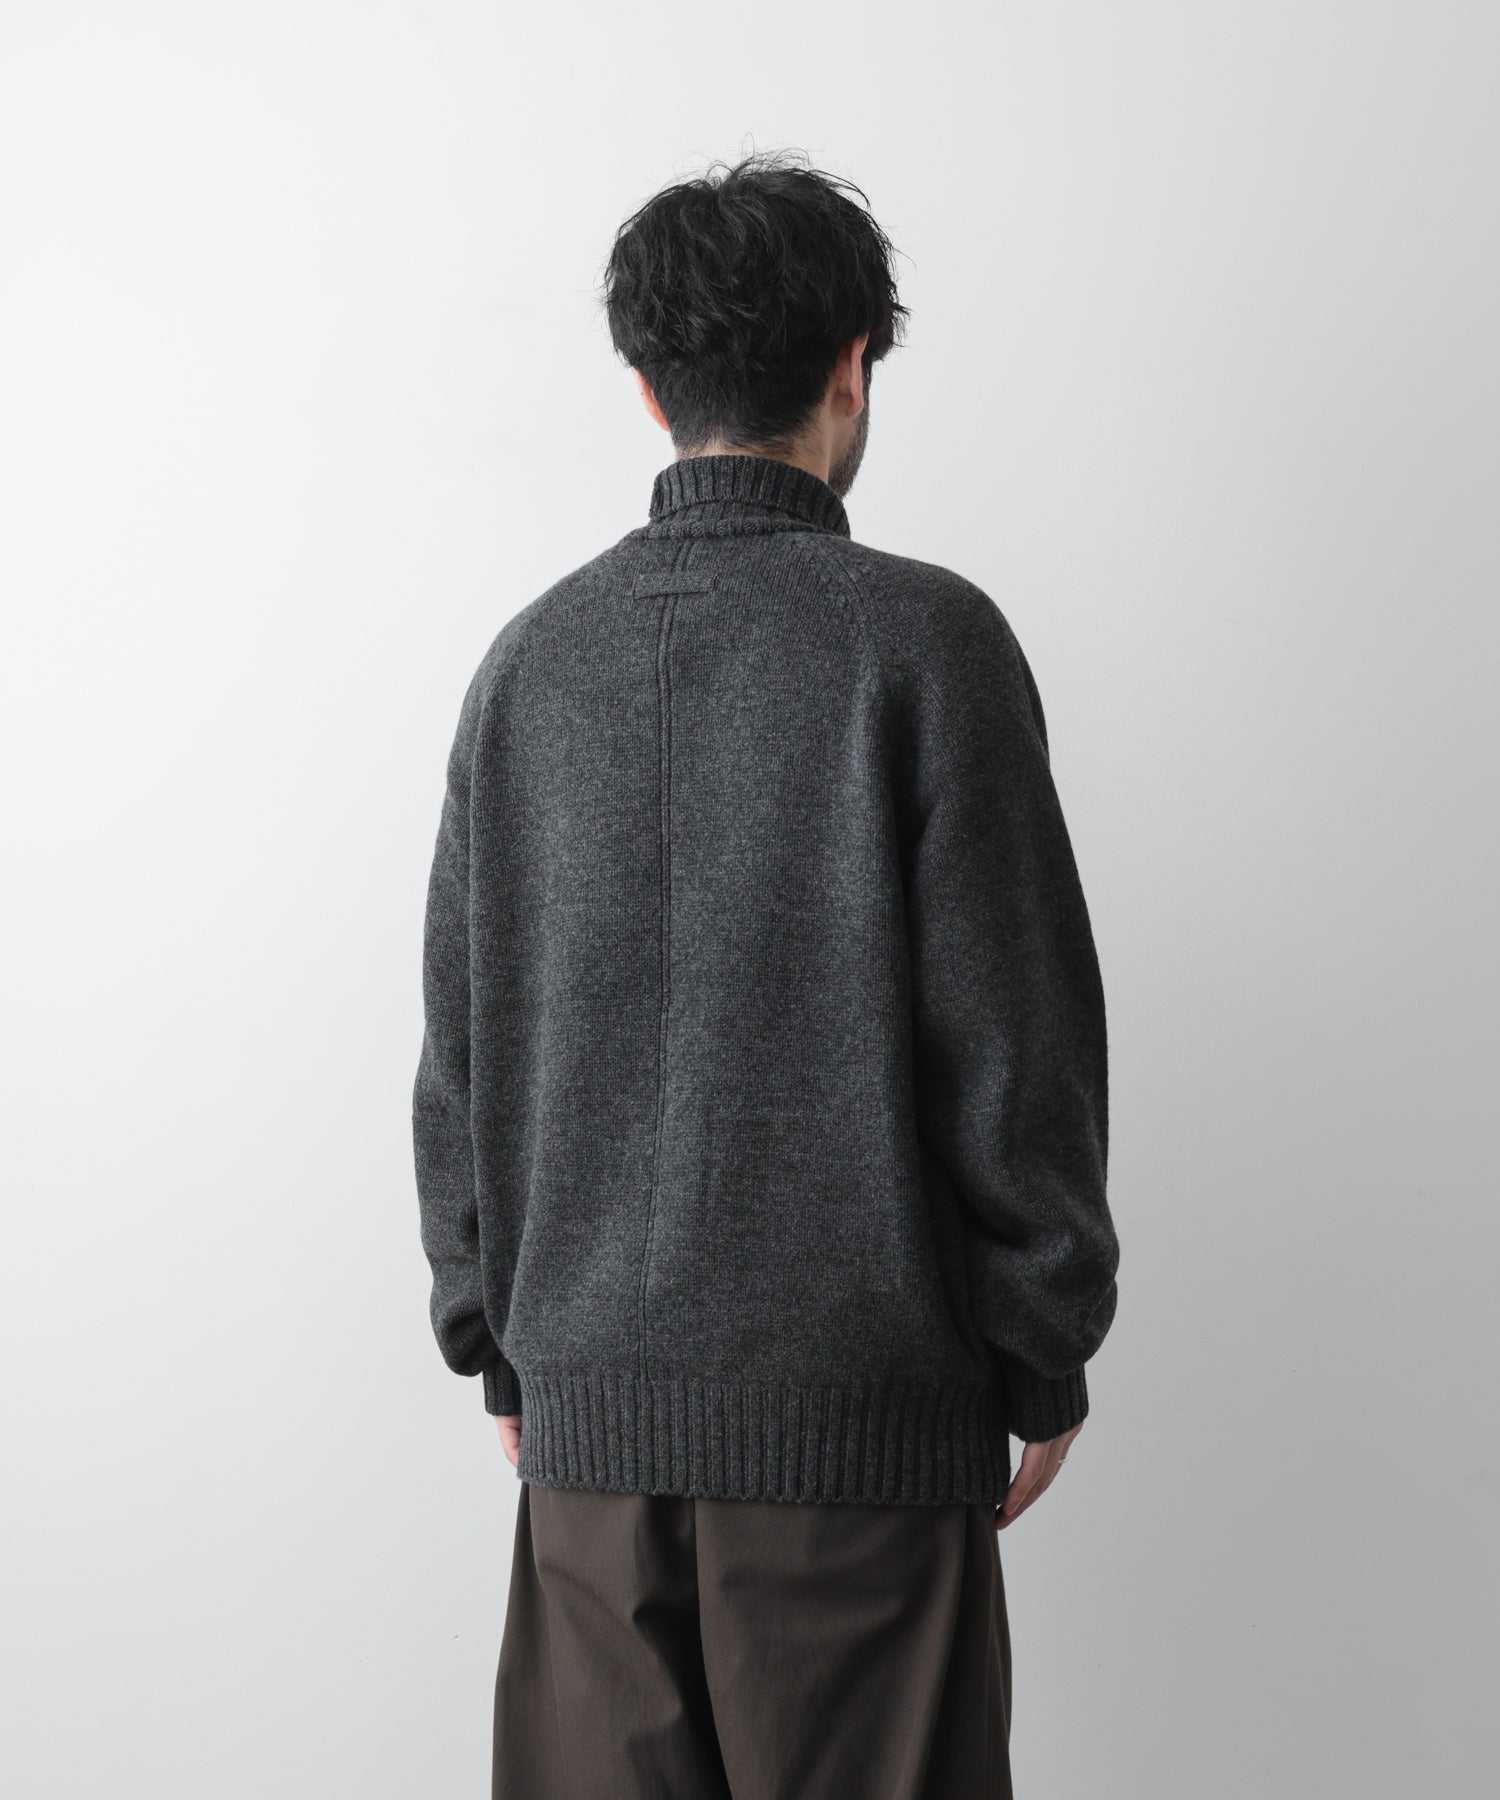 stein】EX FINE LAMBS LOOSE HIGH NECK KNIT LS | 公式通販サイト ...